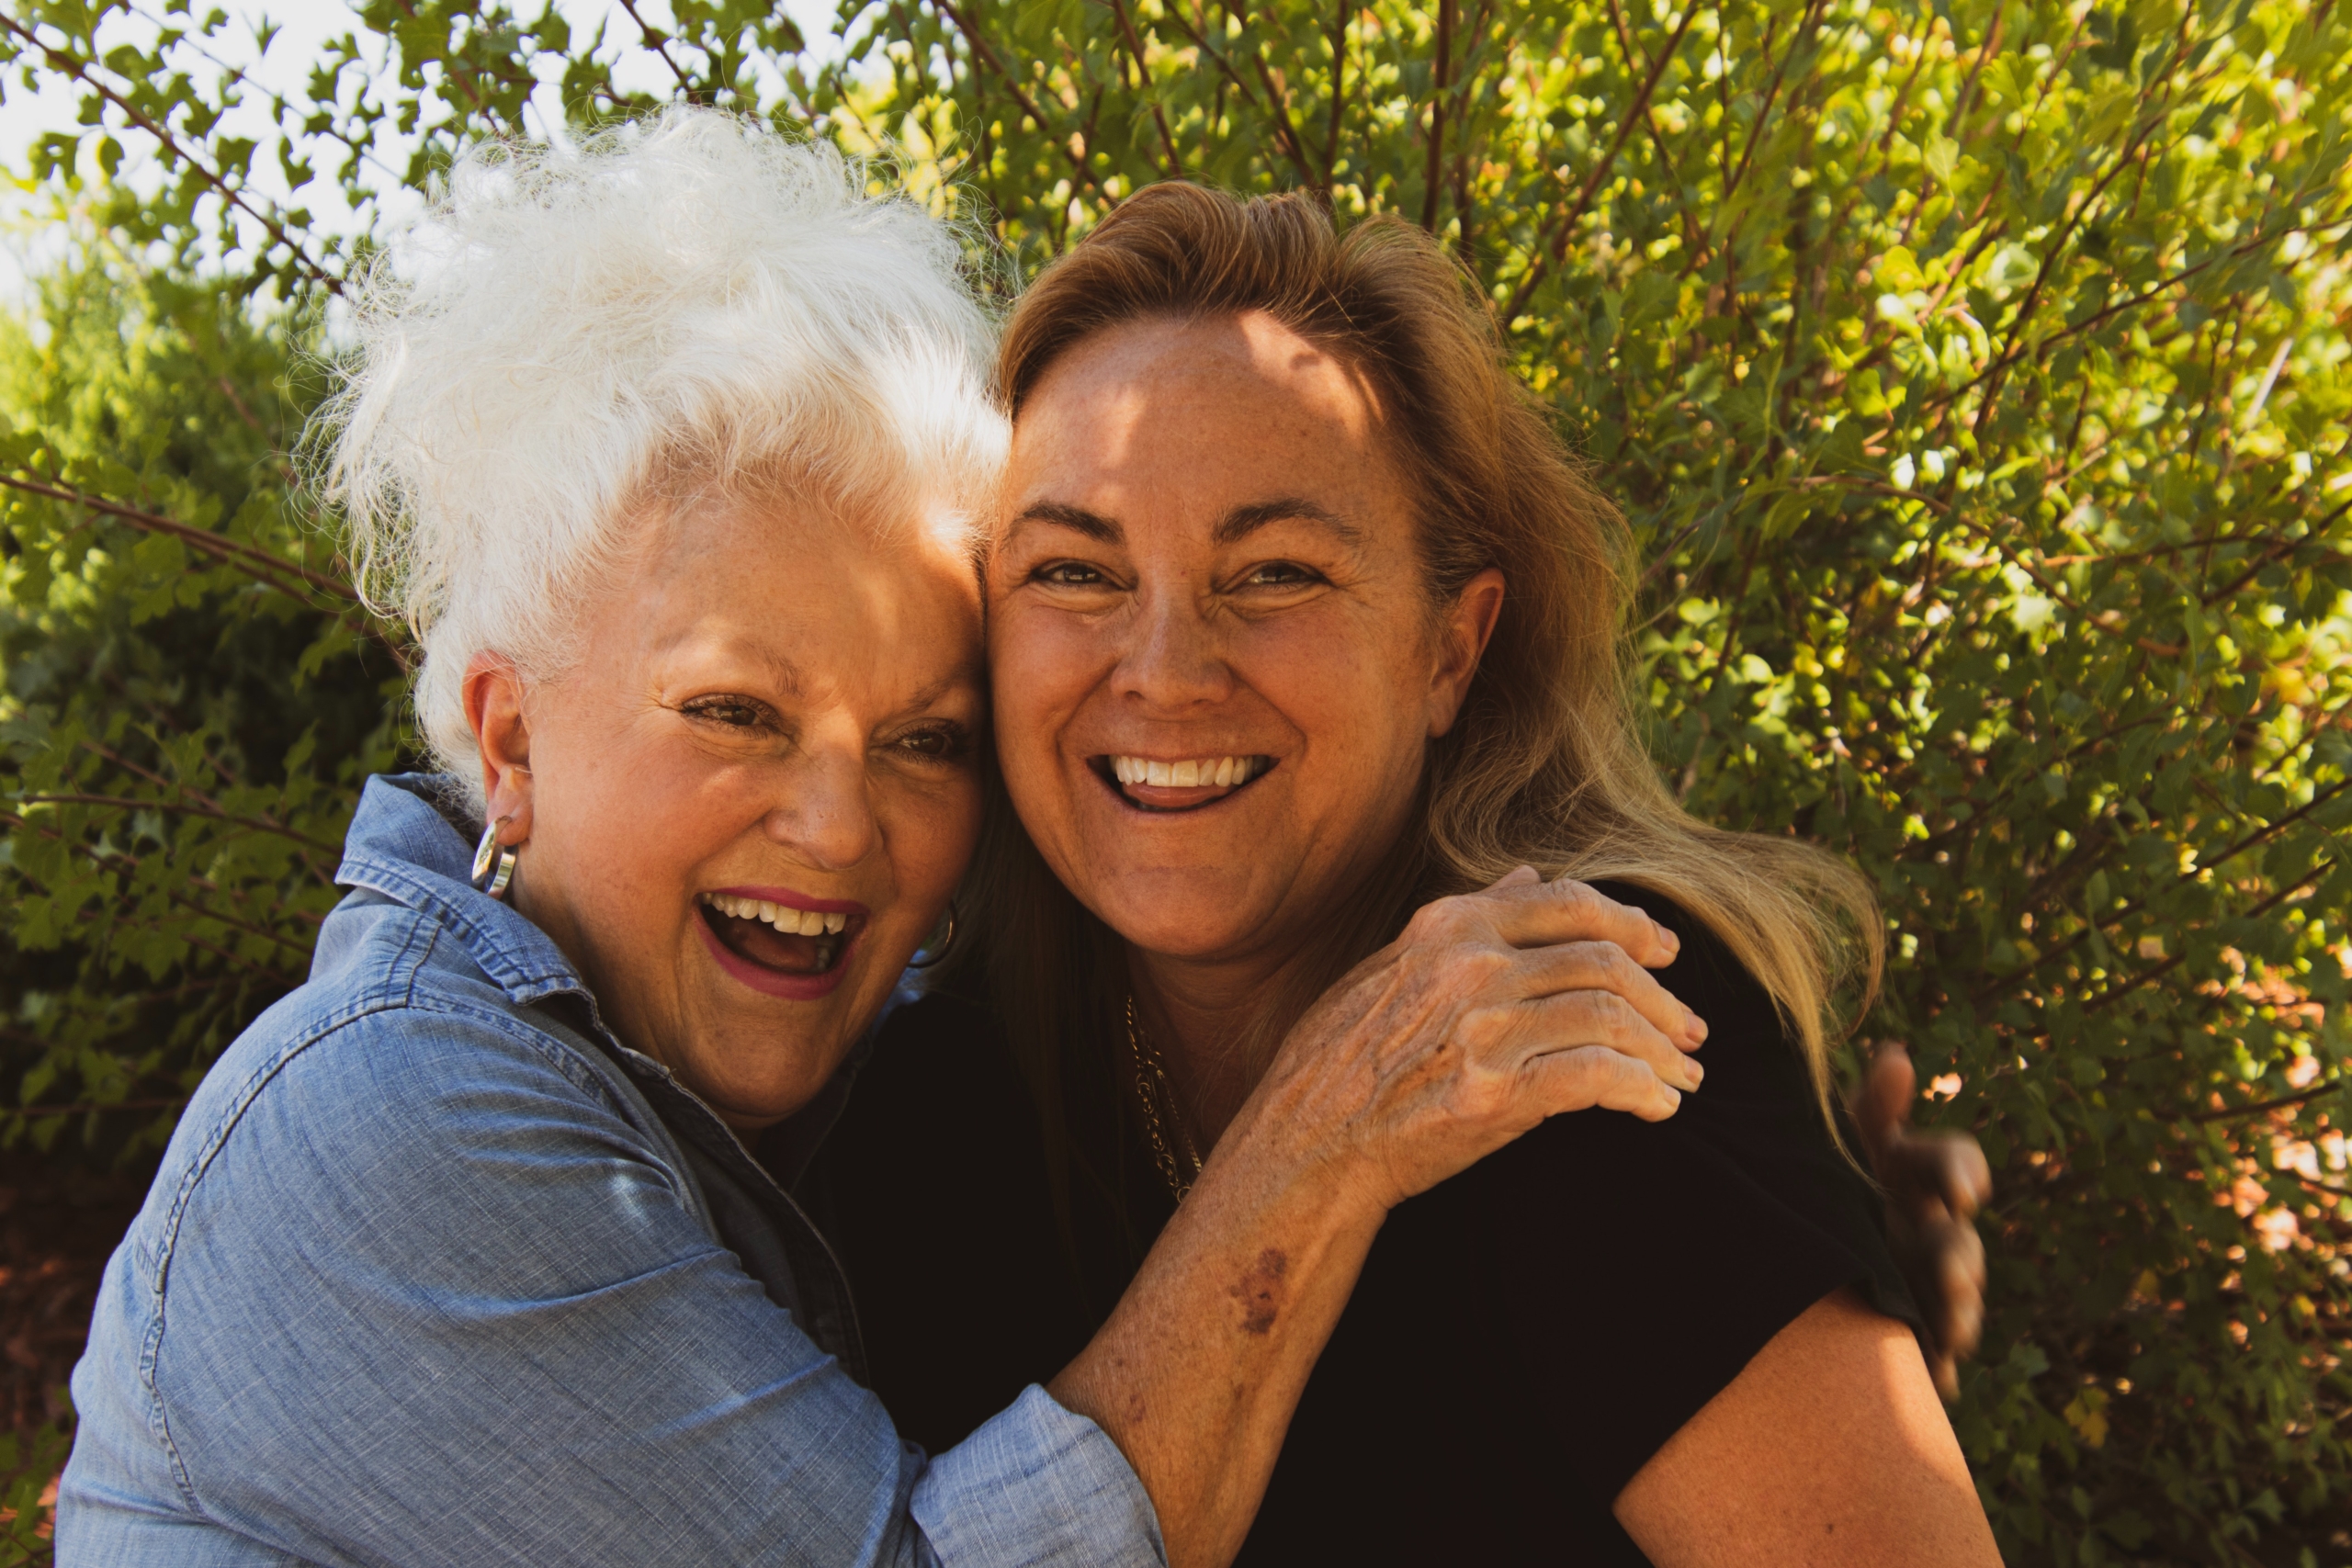 You are currently viewing Aging Parents: 11 Red Flags They May Need Help in the Home